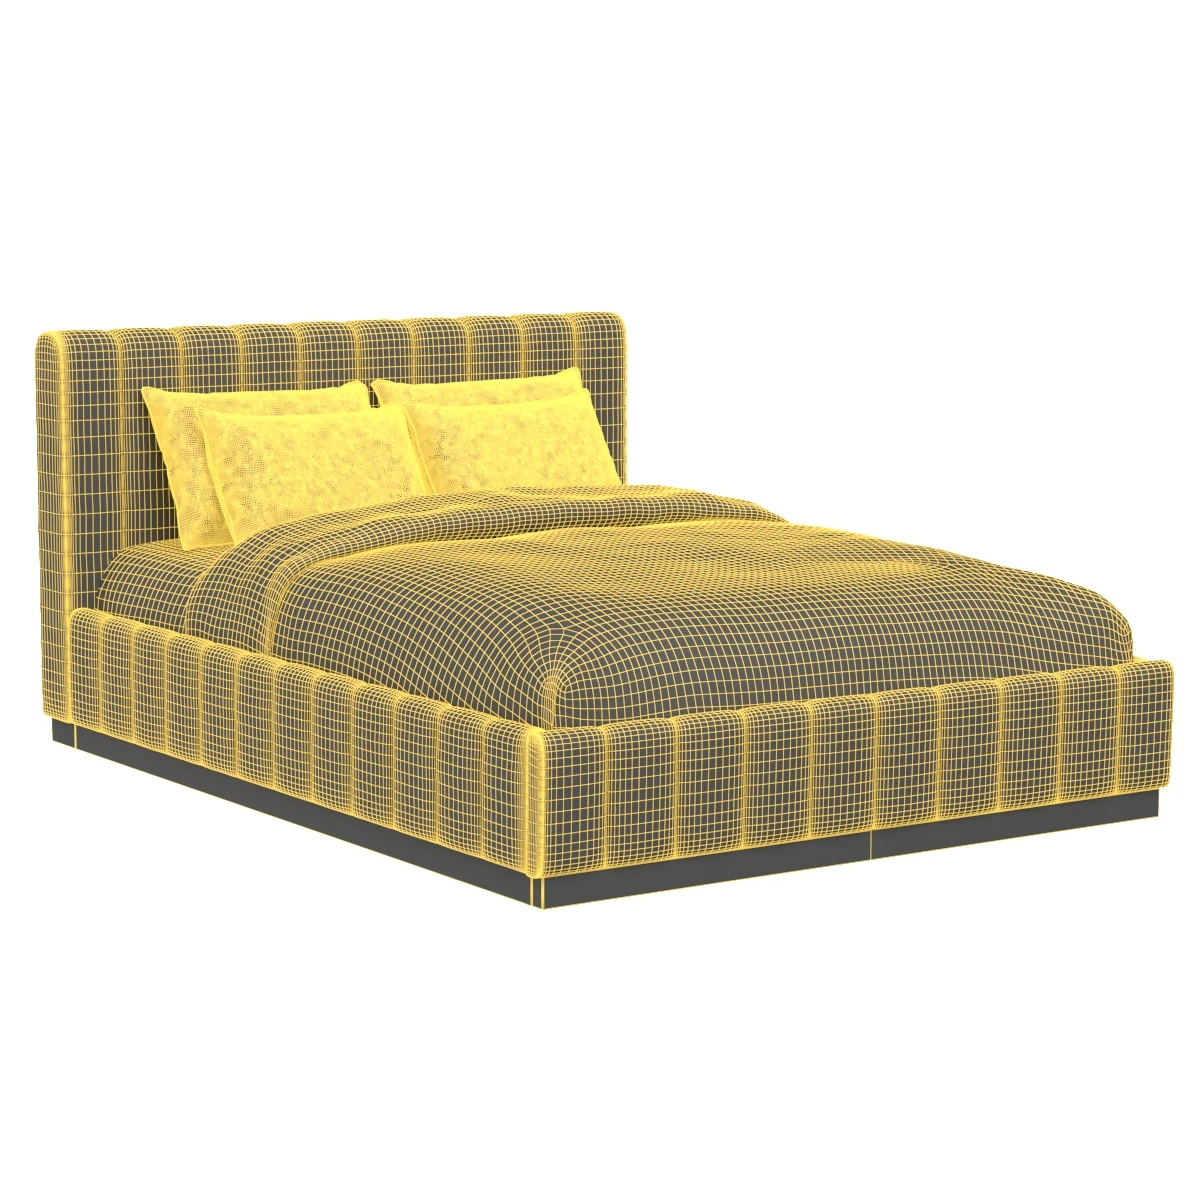 Forte White Queen Bed 3D Model_07